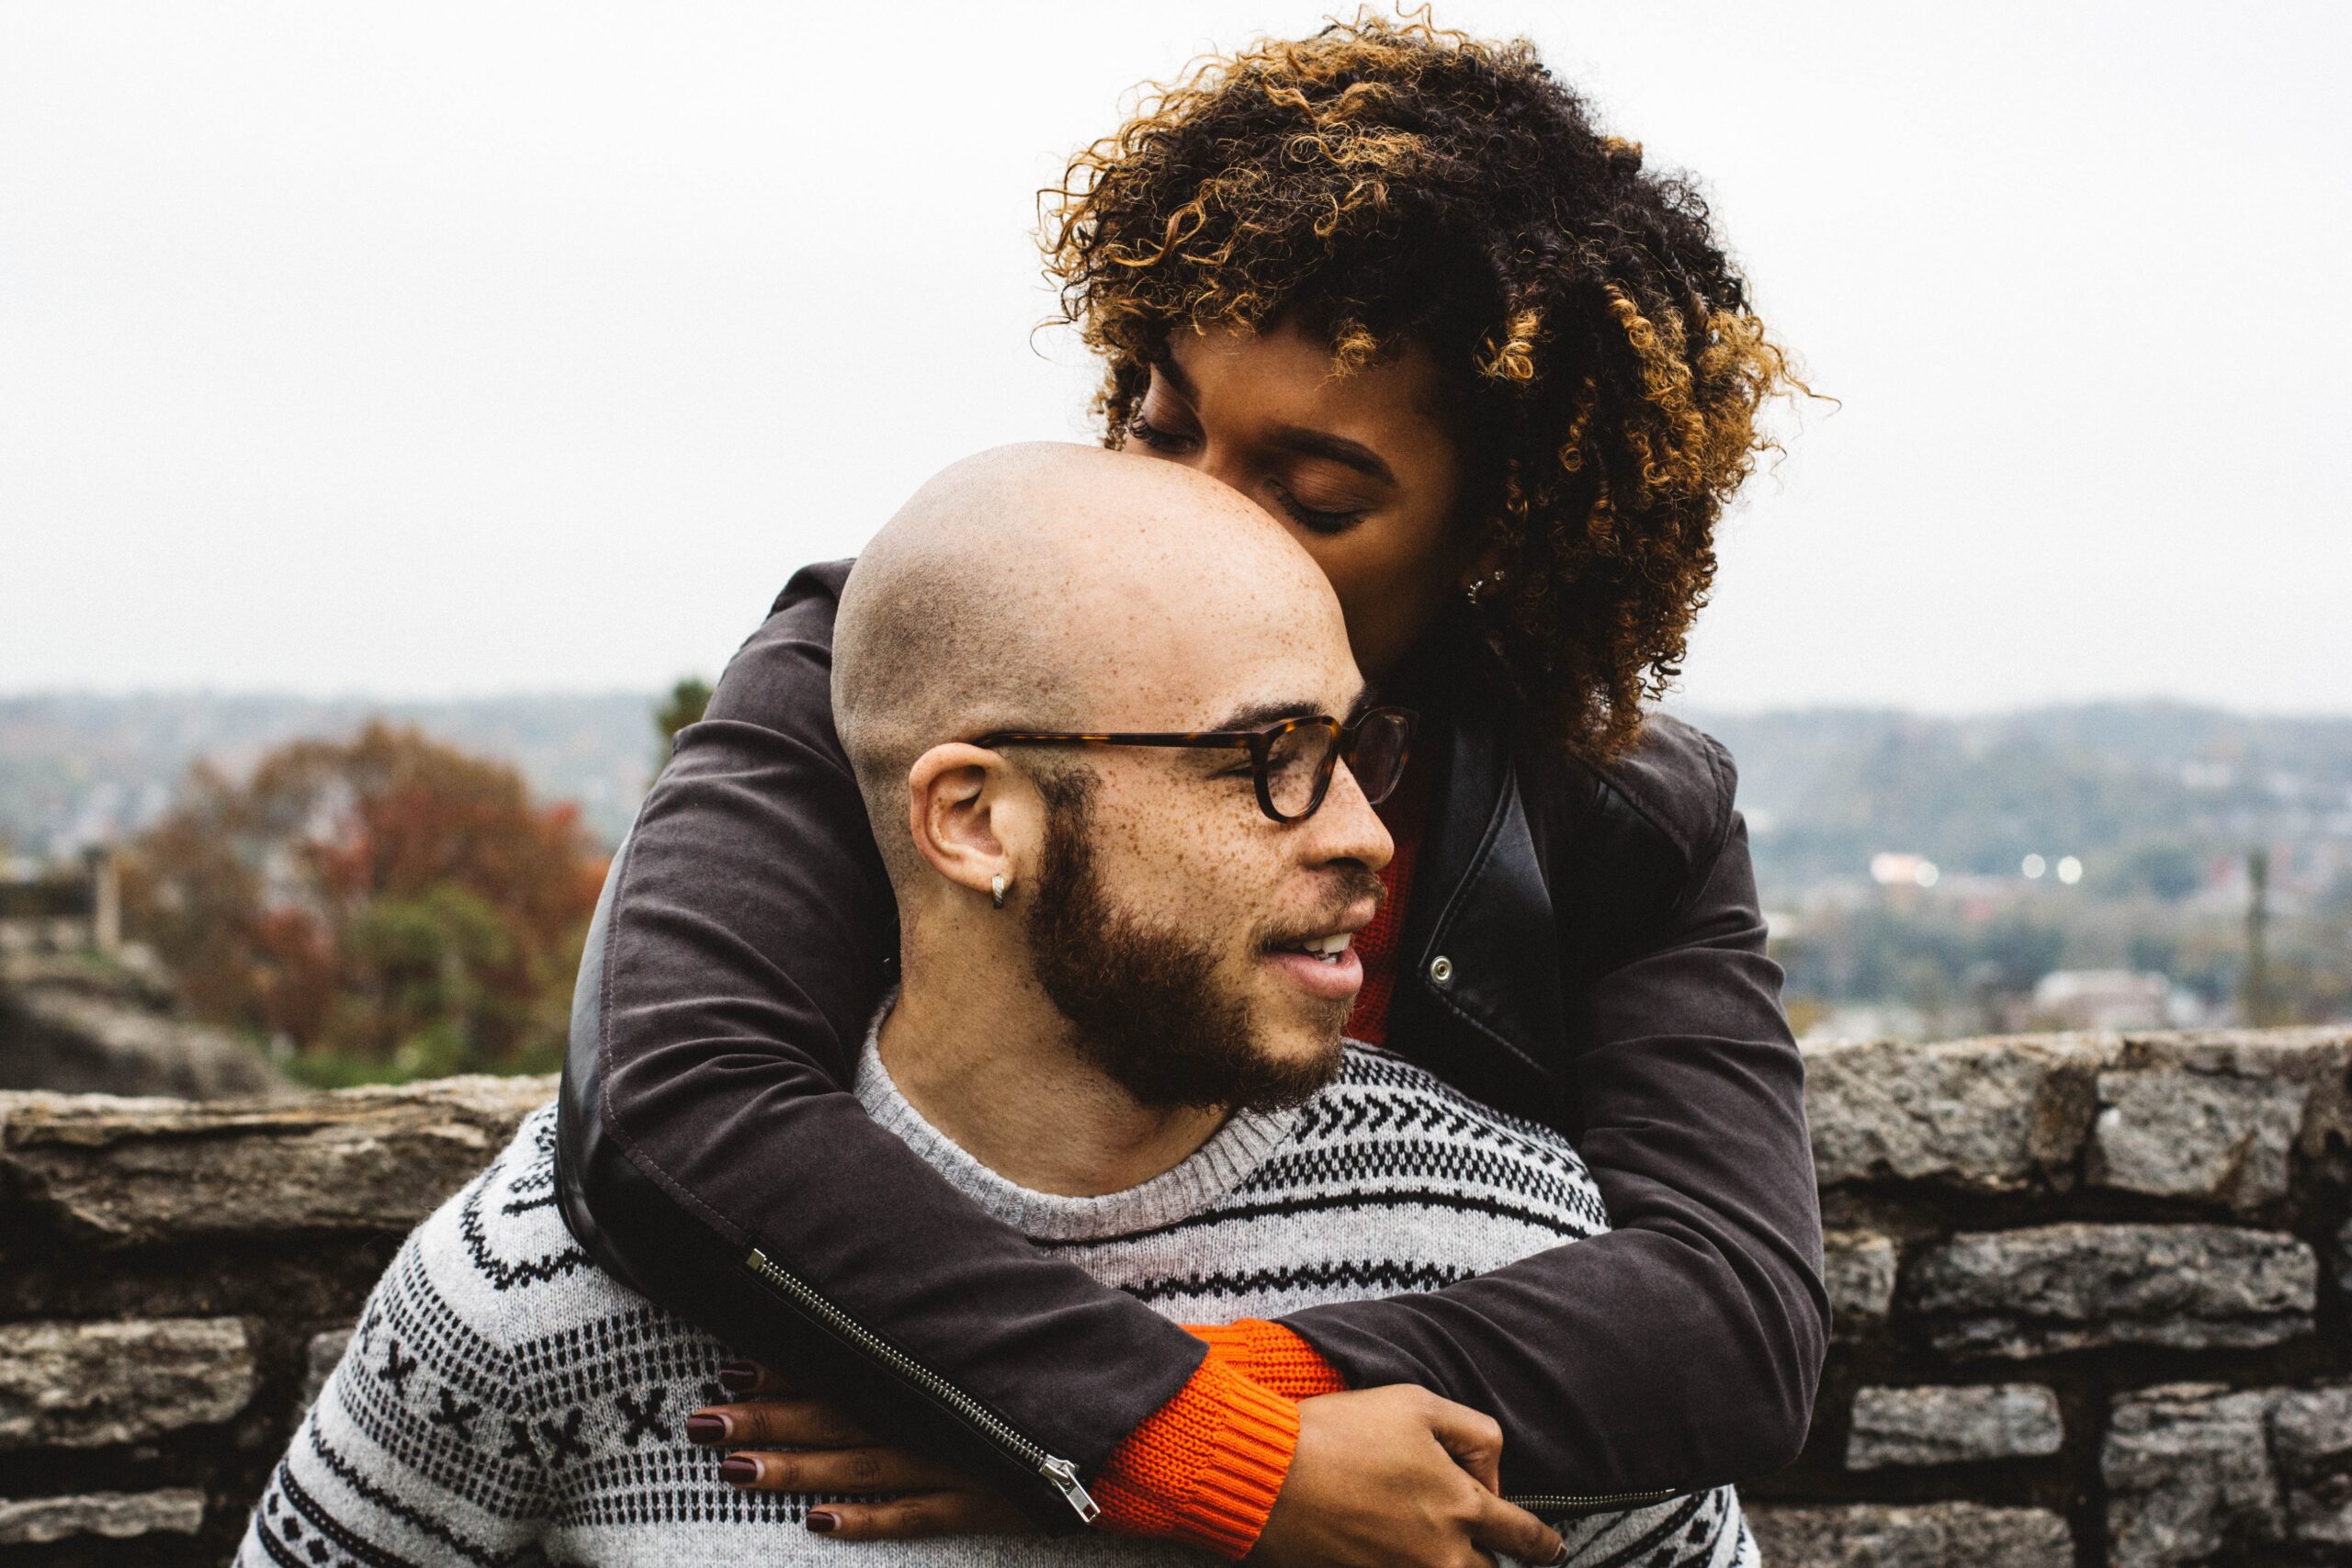 Interracial dating christian perspective